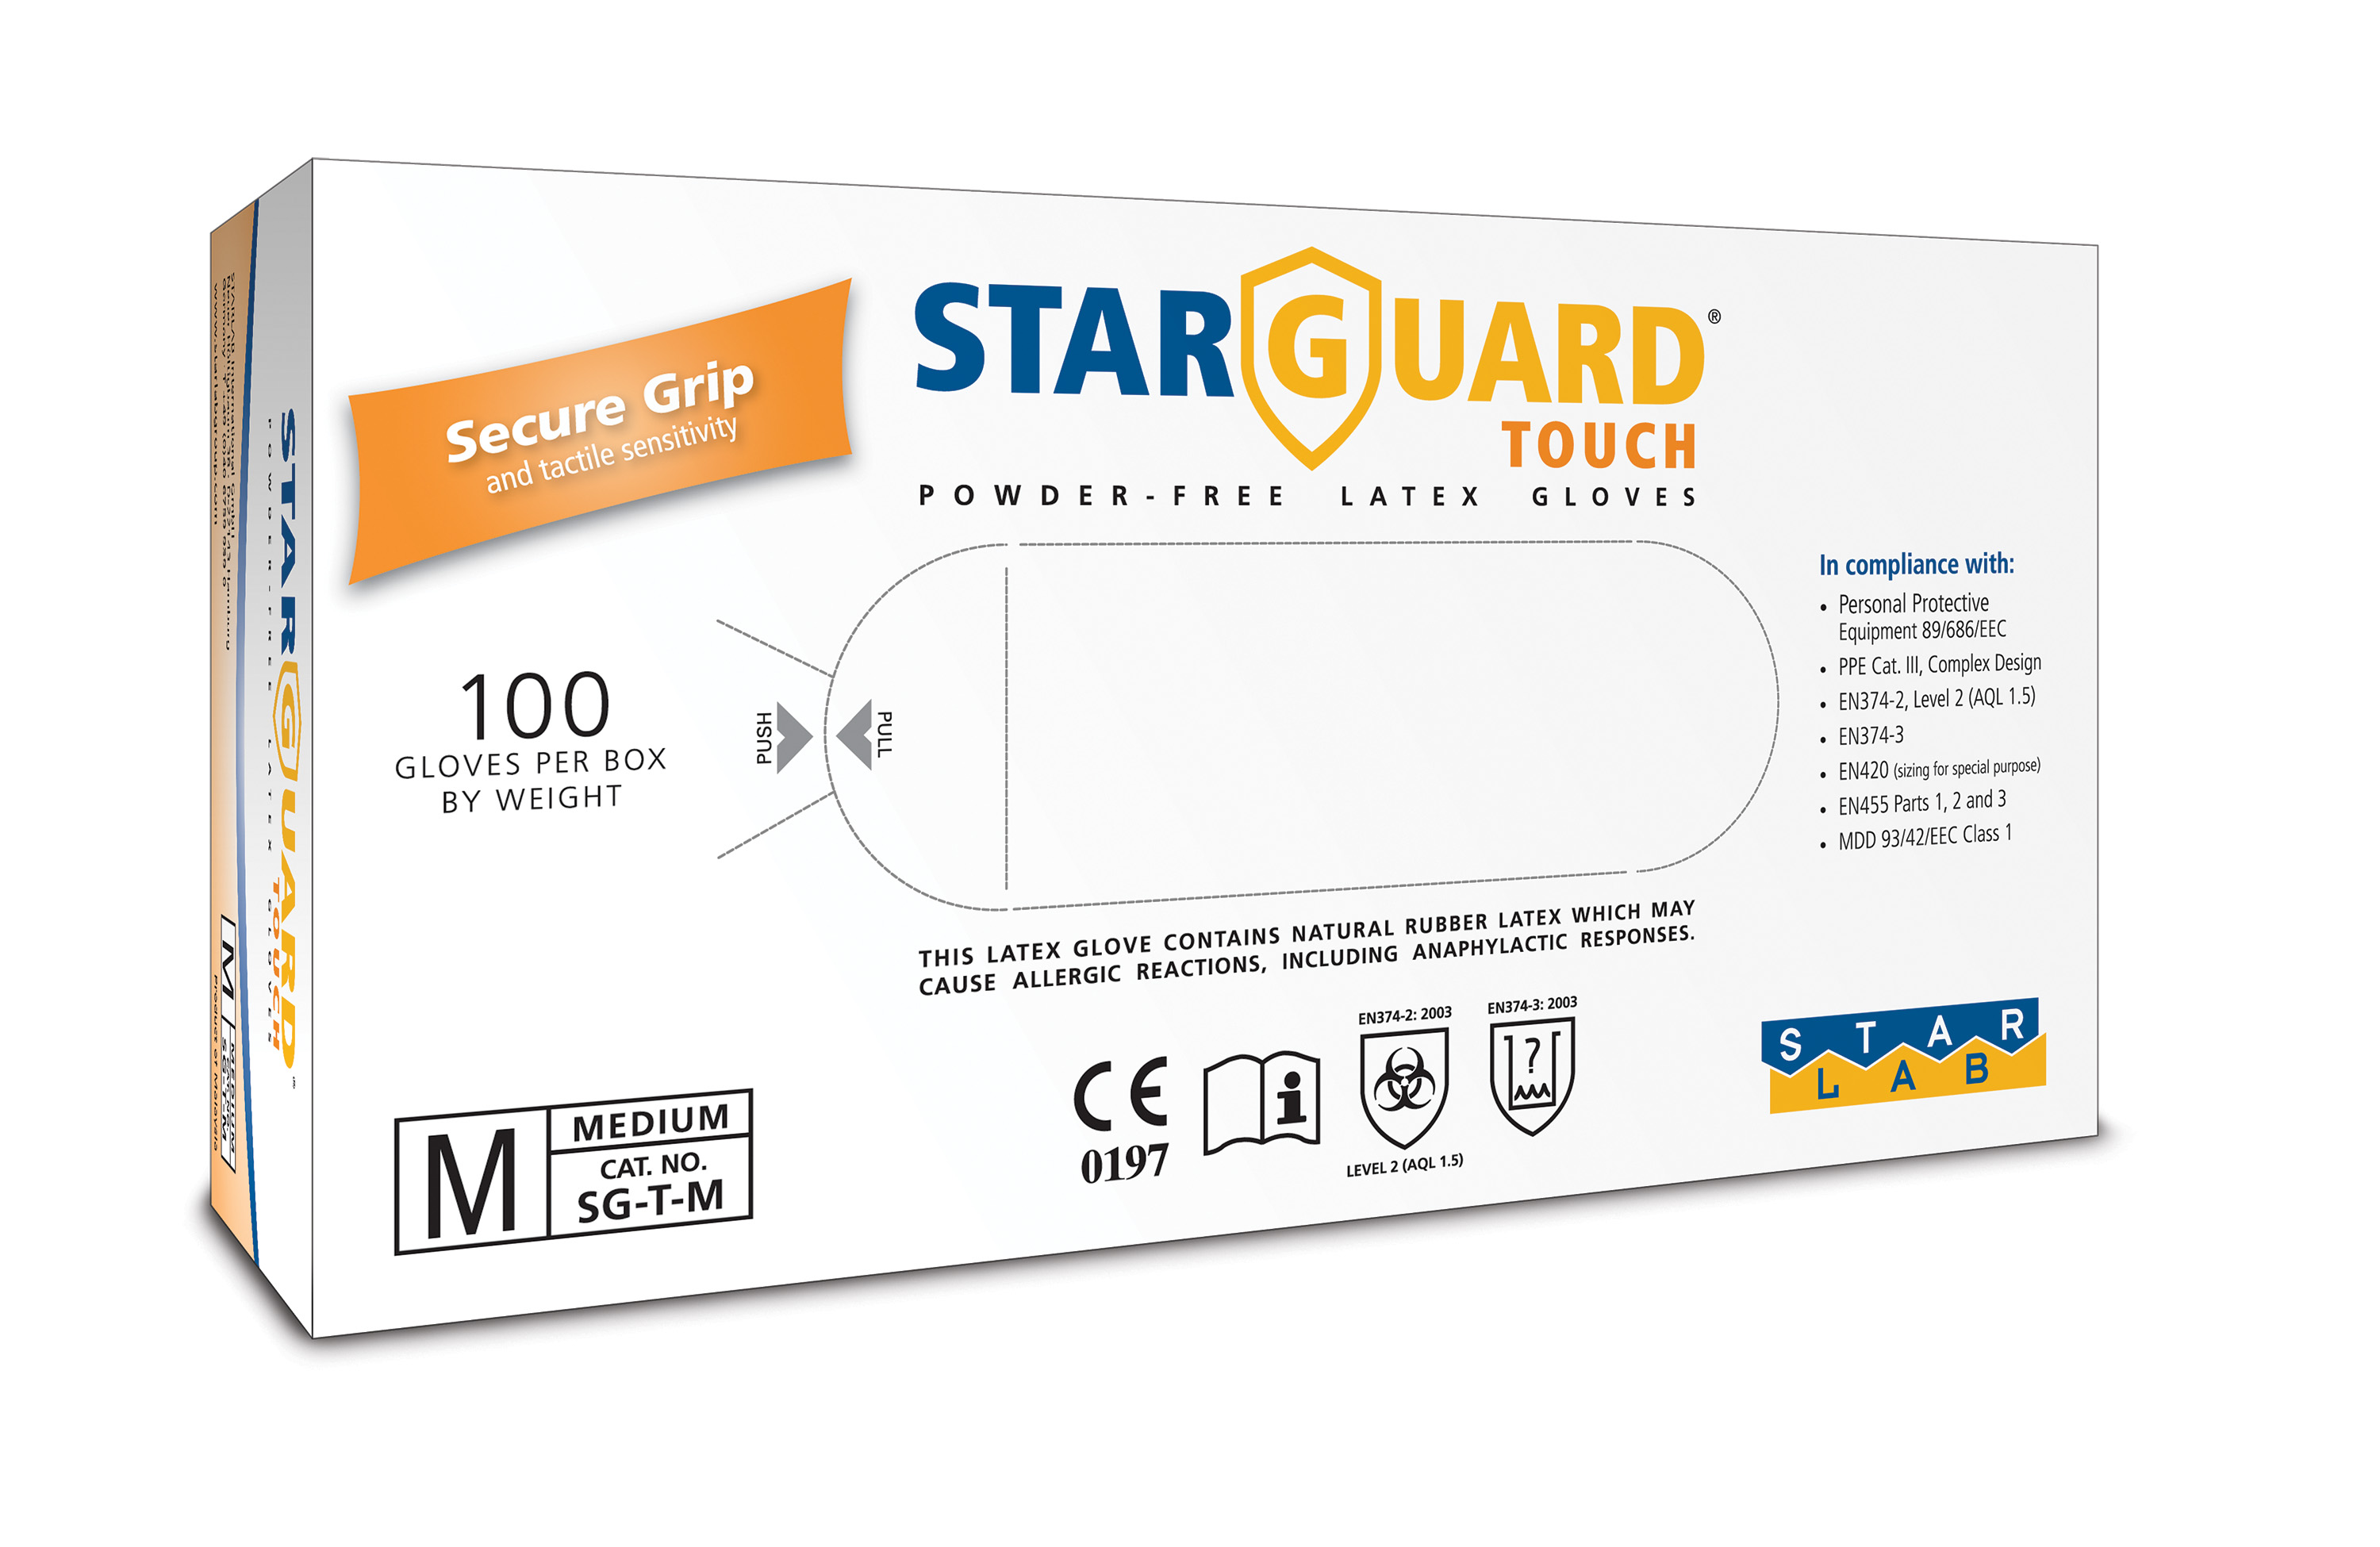 StarGuard TOUCH Latex Gloves, Powder Free, Natural, Size M, Pk/ 10 x 100 gloves.